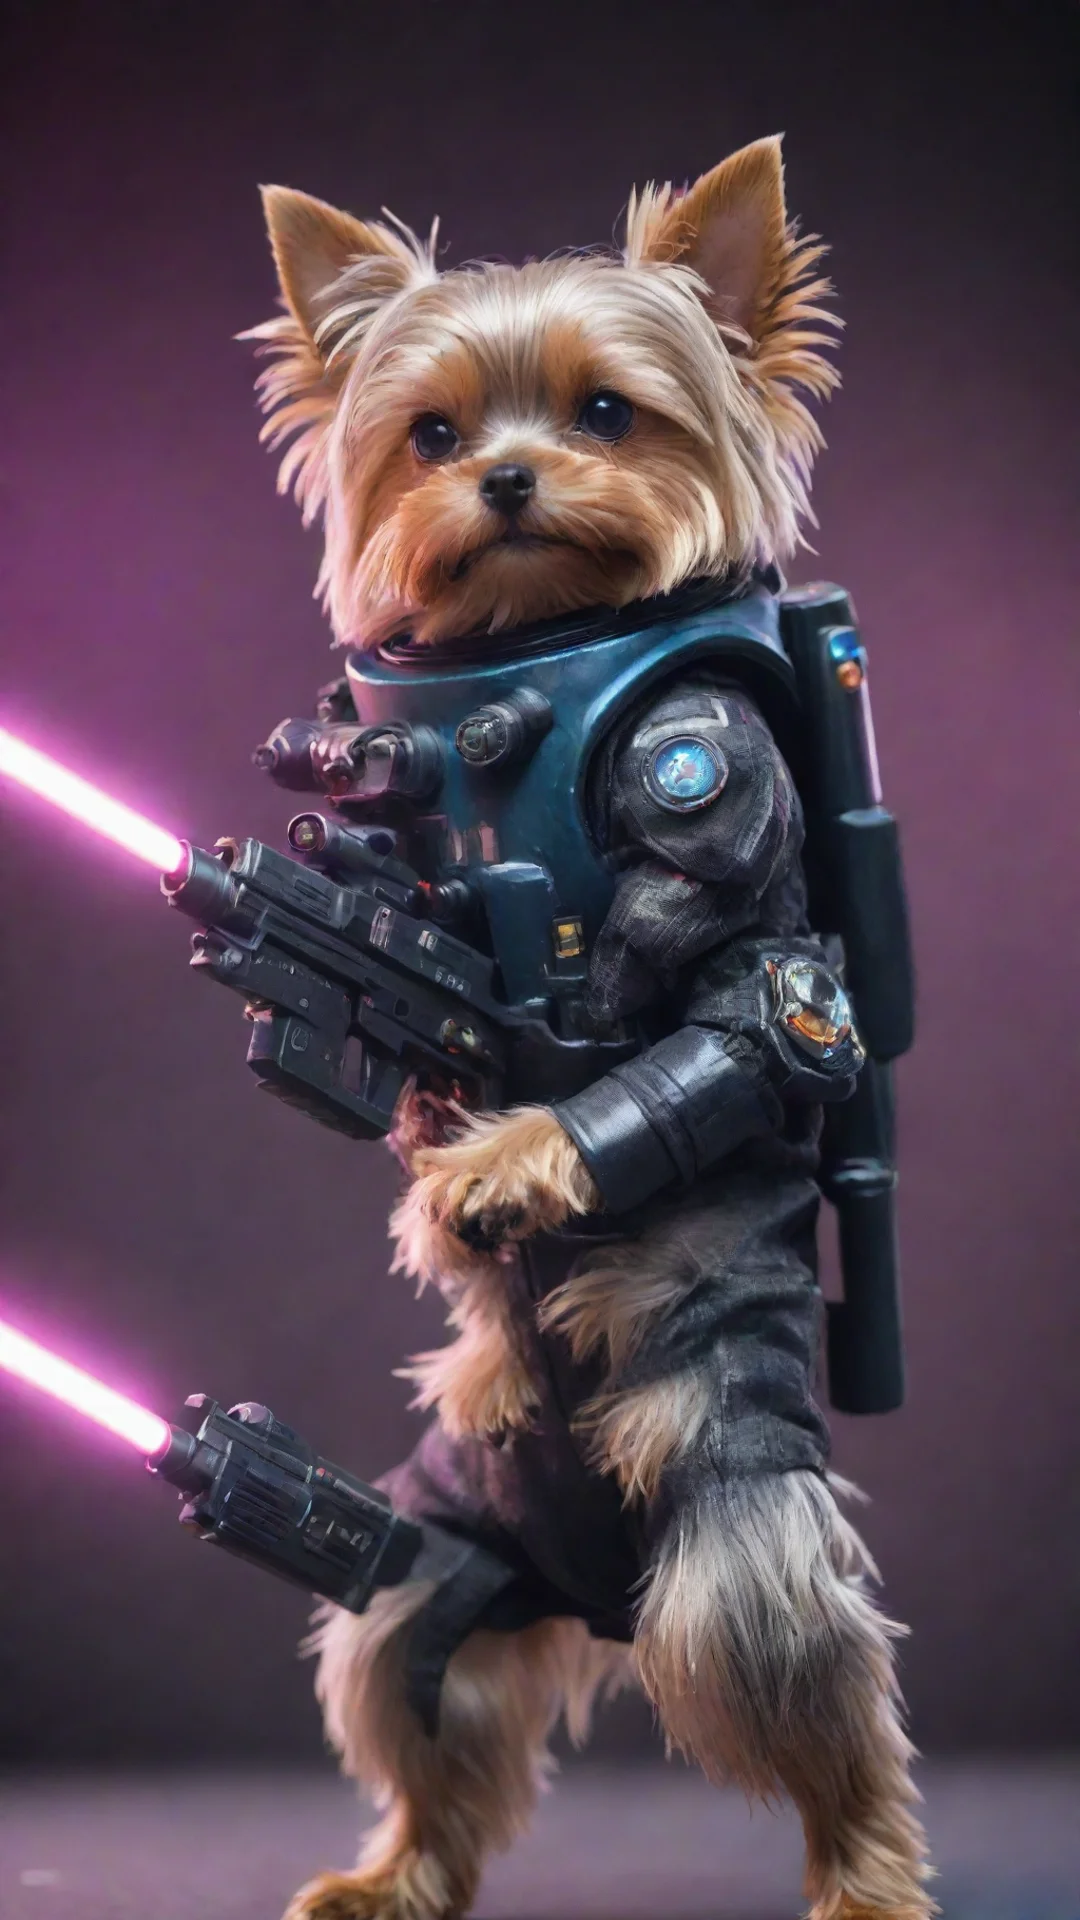 amazing yorkshire terrier in a cyberpunk space suit firing a laser gun awesome portrait 2 tall